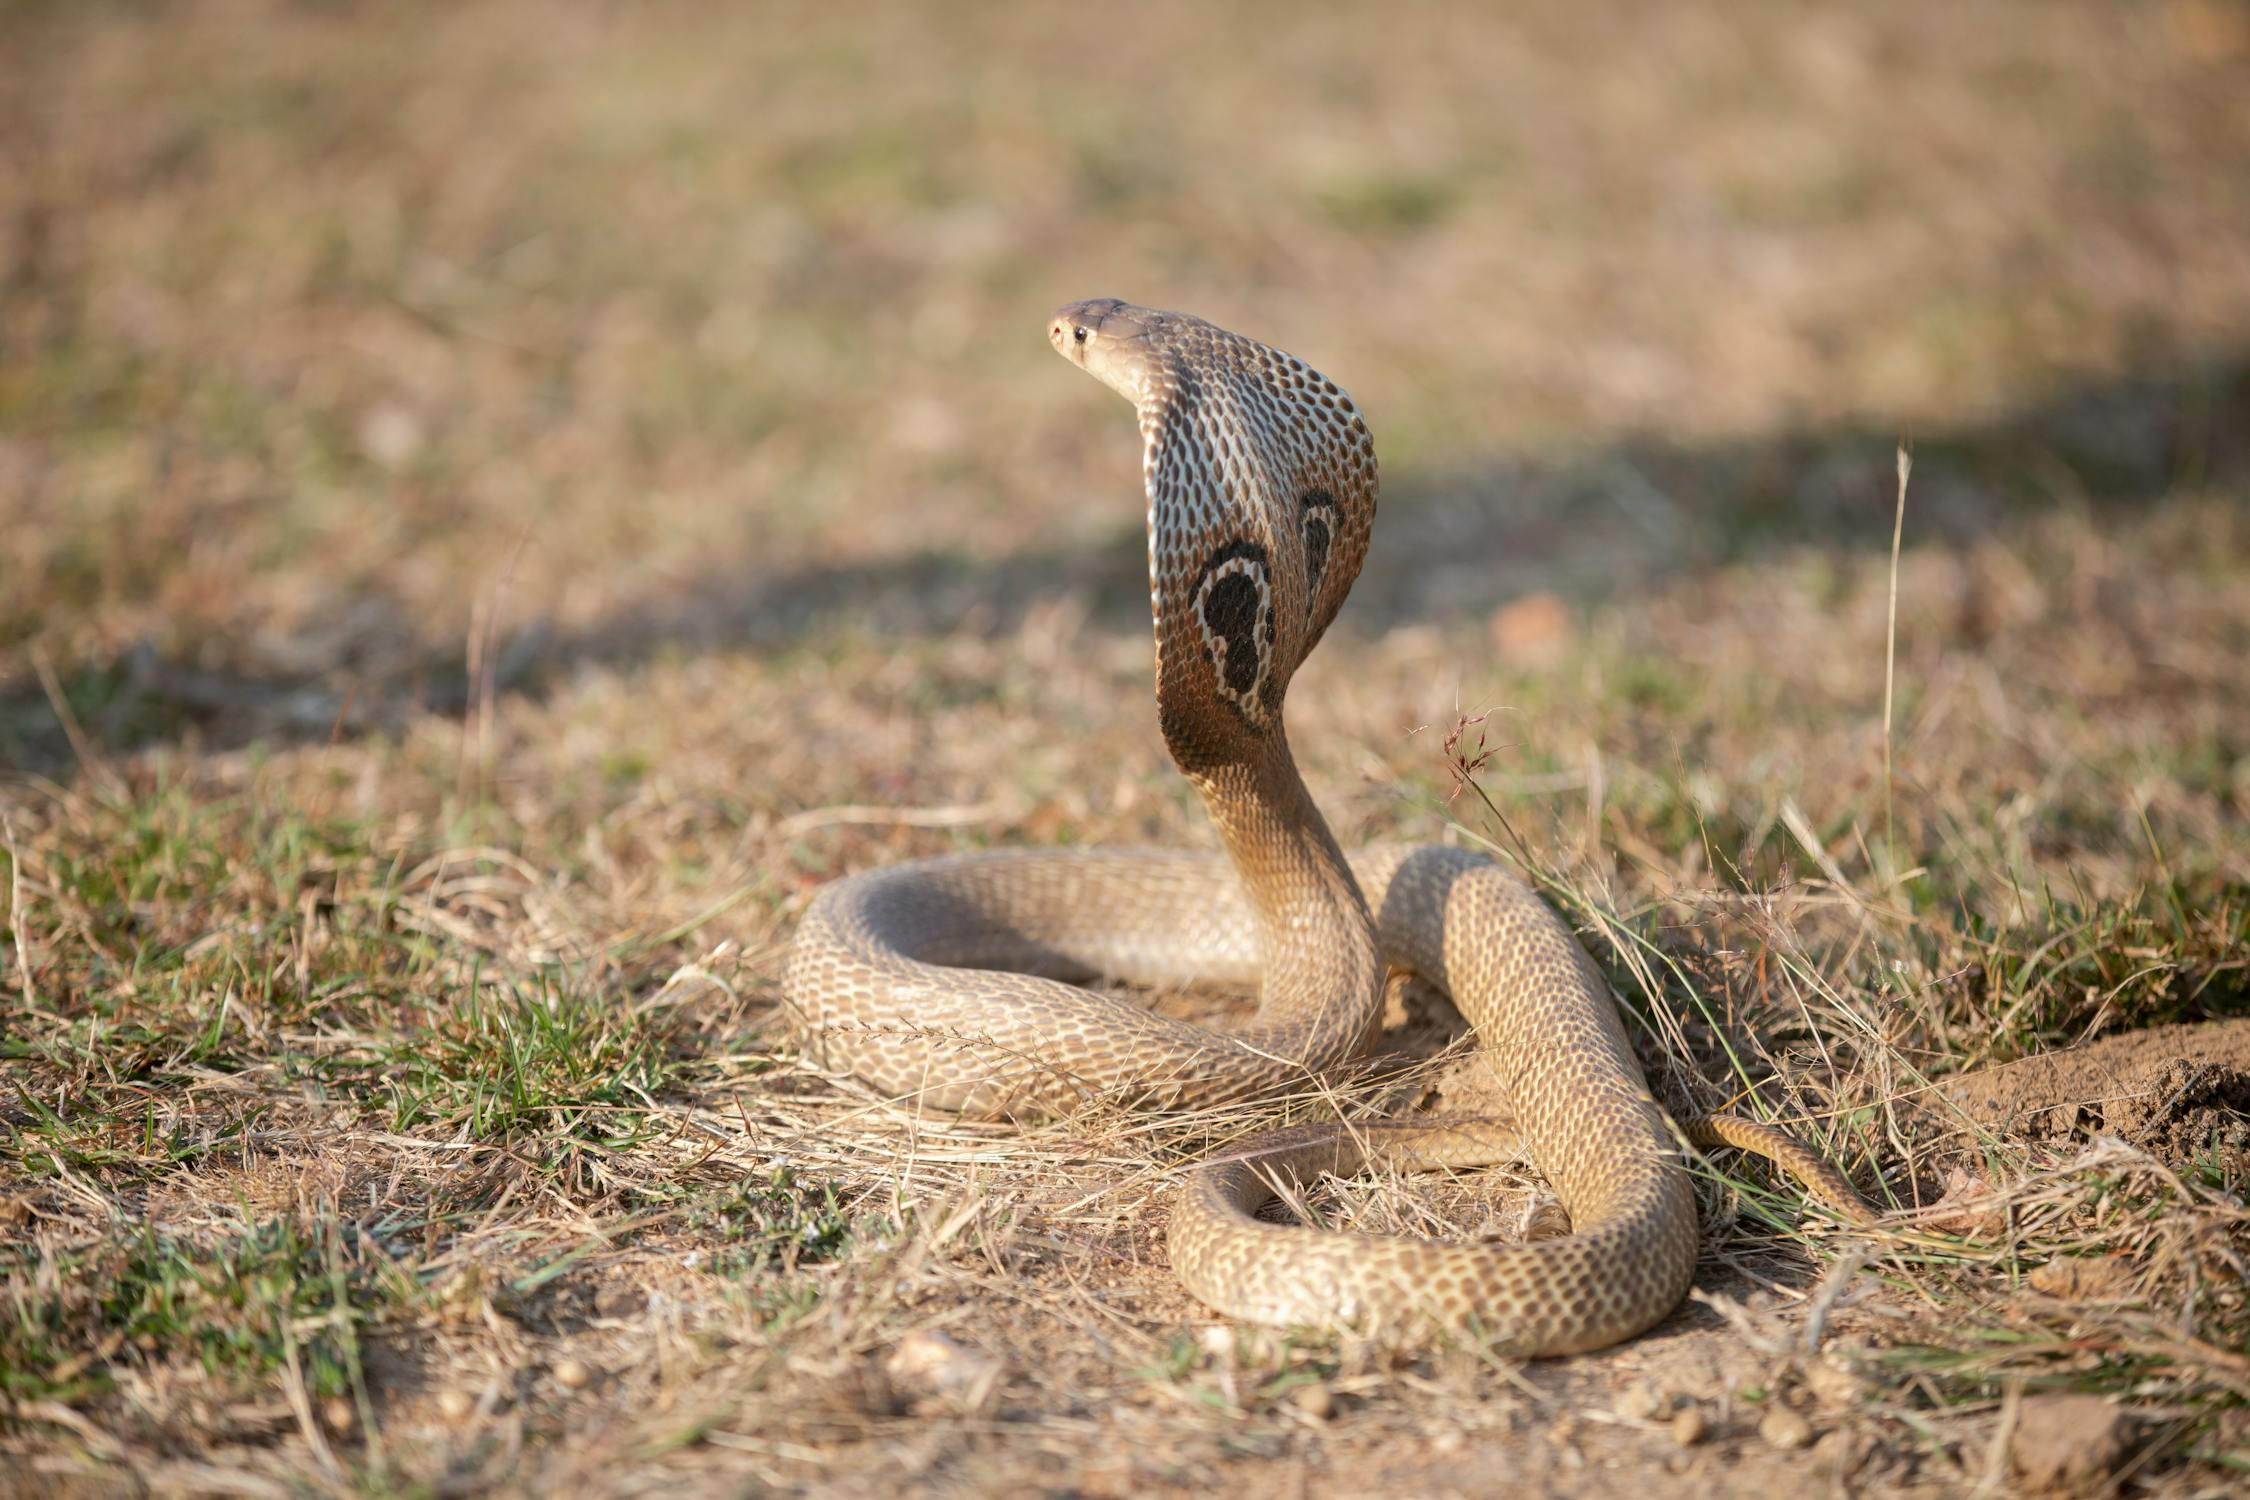 https://www.pexels.com/photo/an-indian-cobra-on-the-ground-10509700/